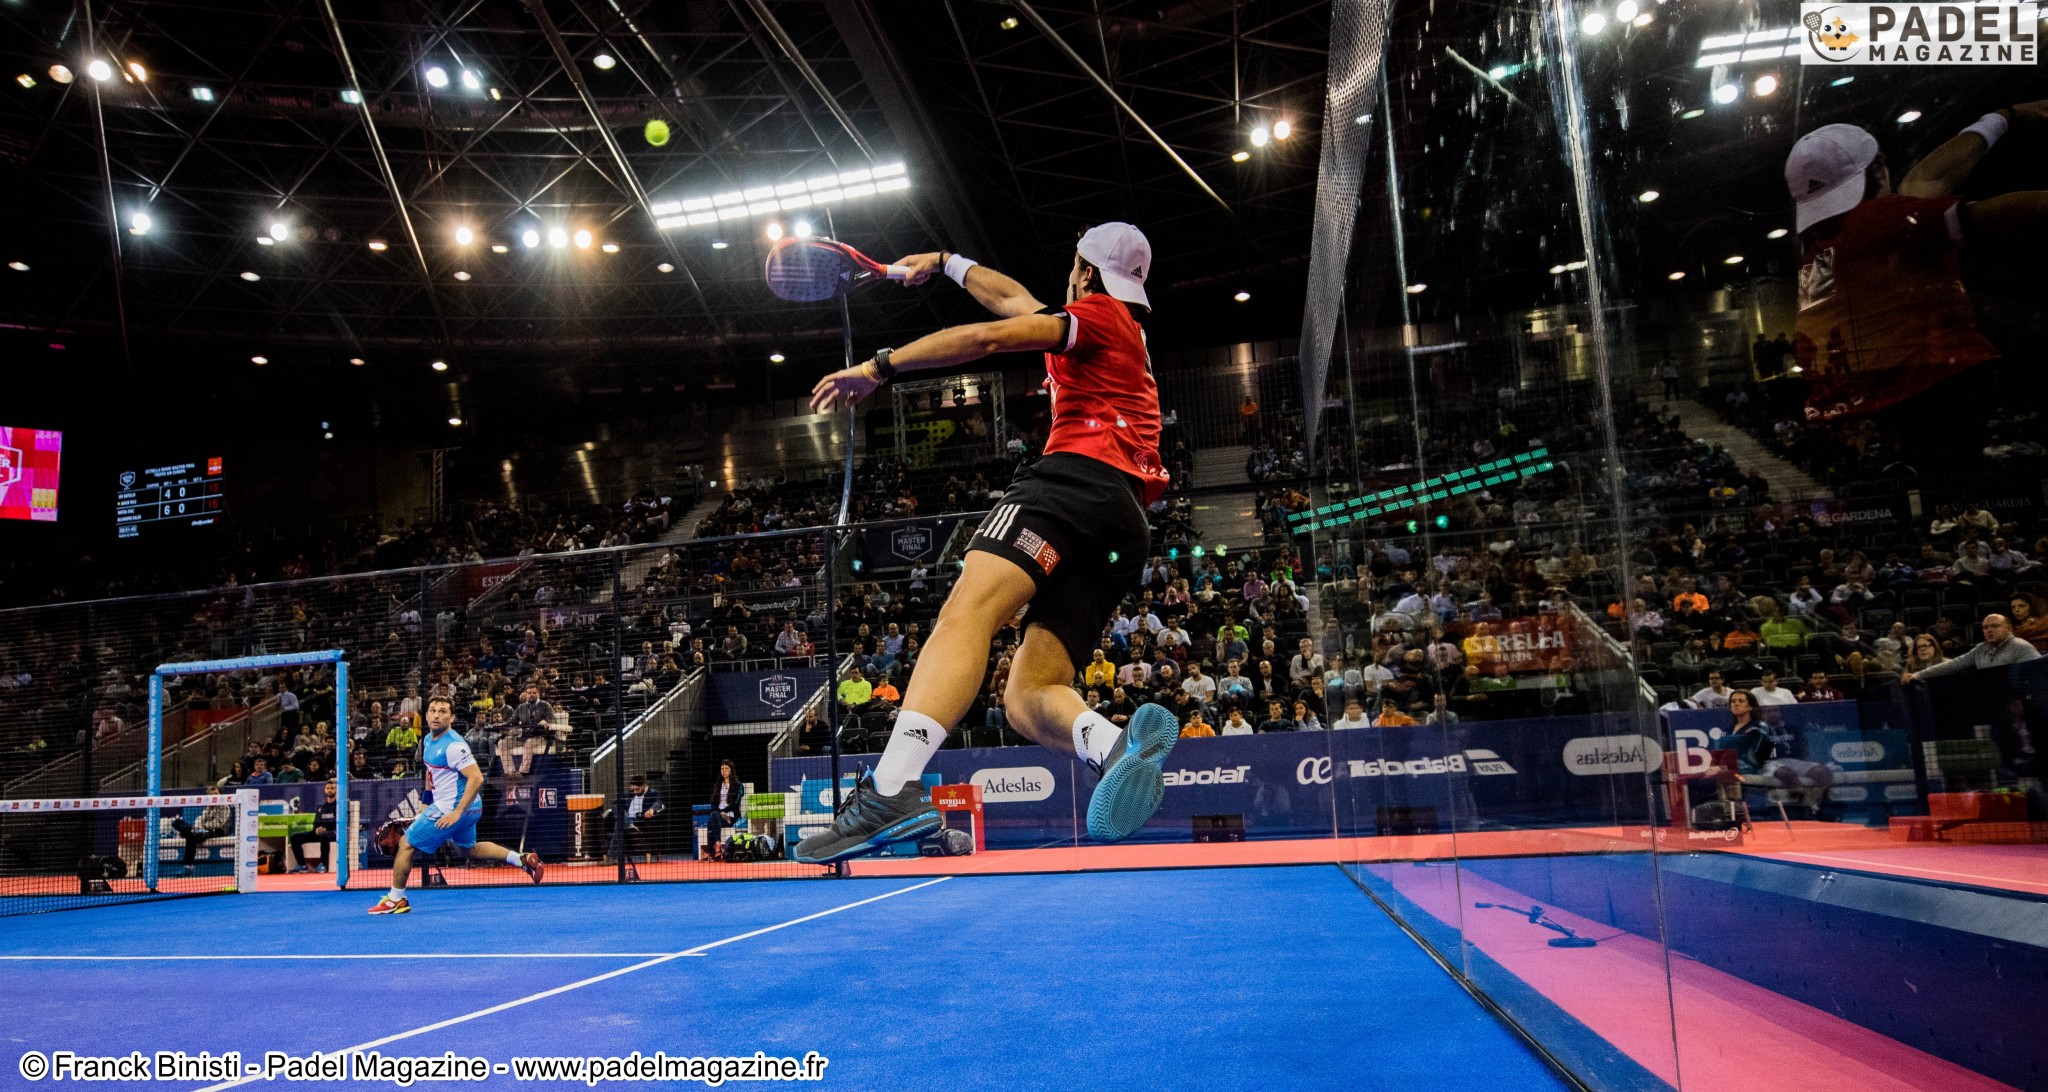 How does the ranking of World Padel Tour ?